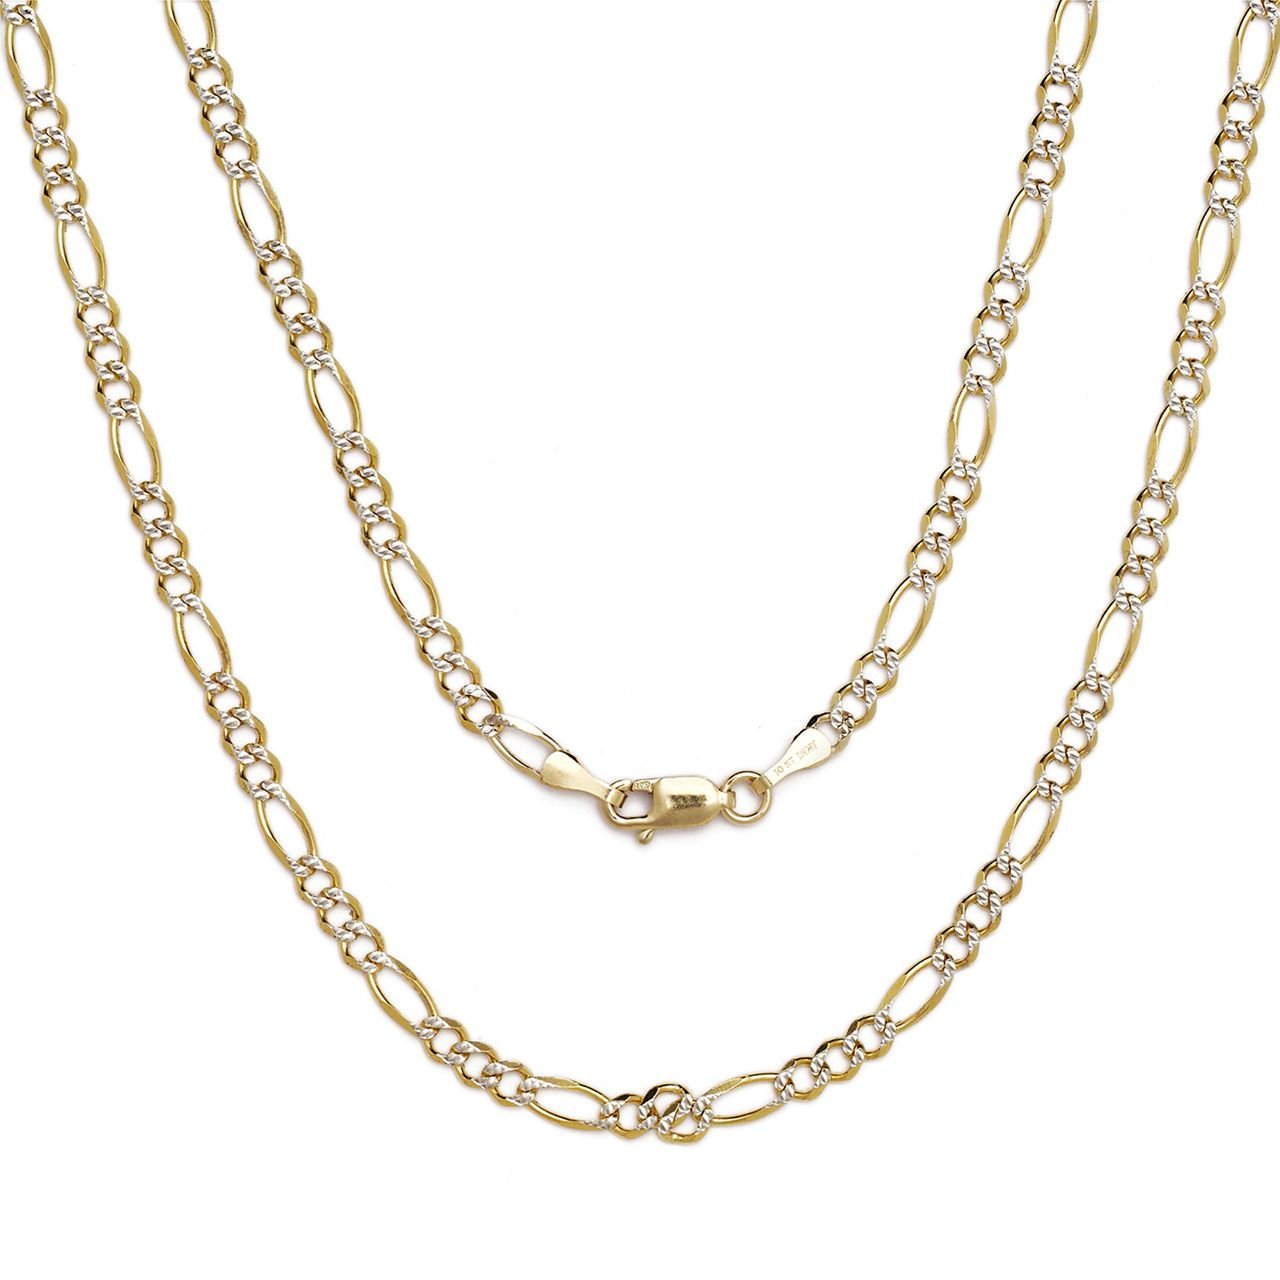 10k Two-Tone Gold Figaro Chain Necklace with White Pave, 0.16 Inch (4mm)